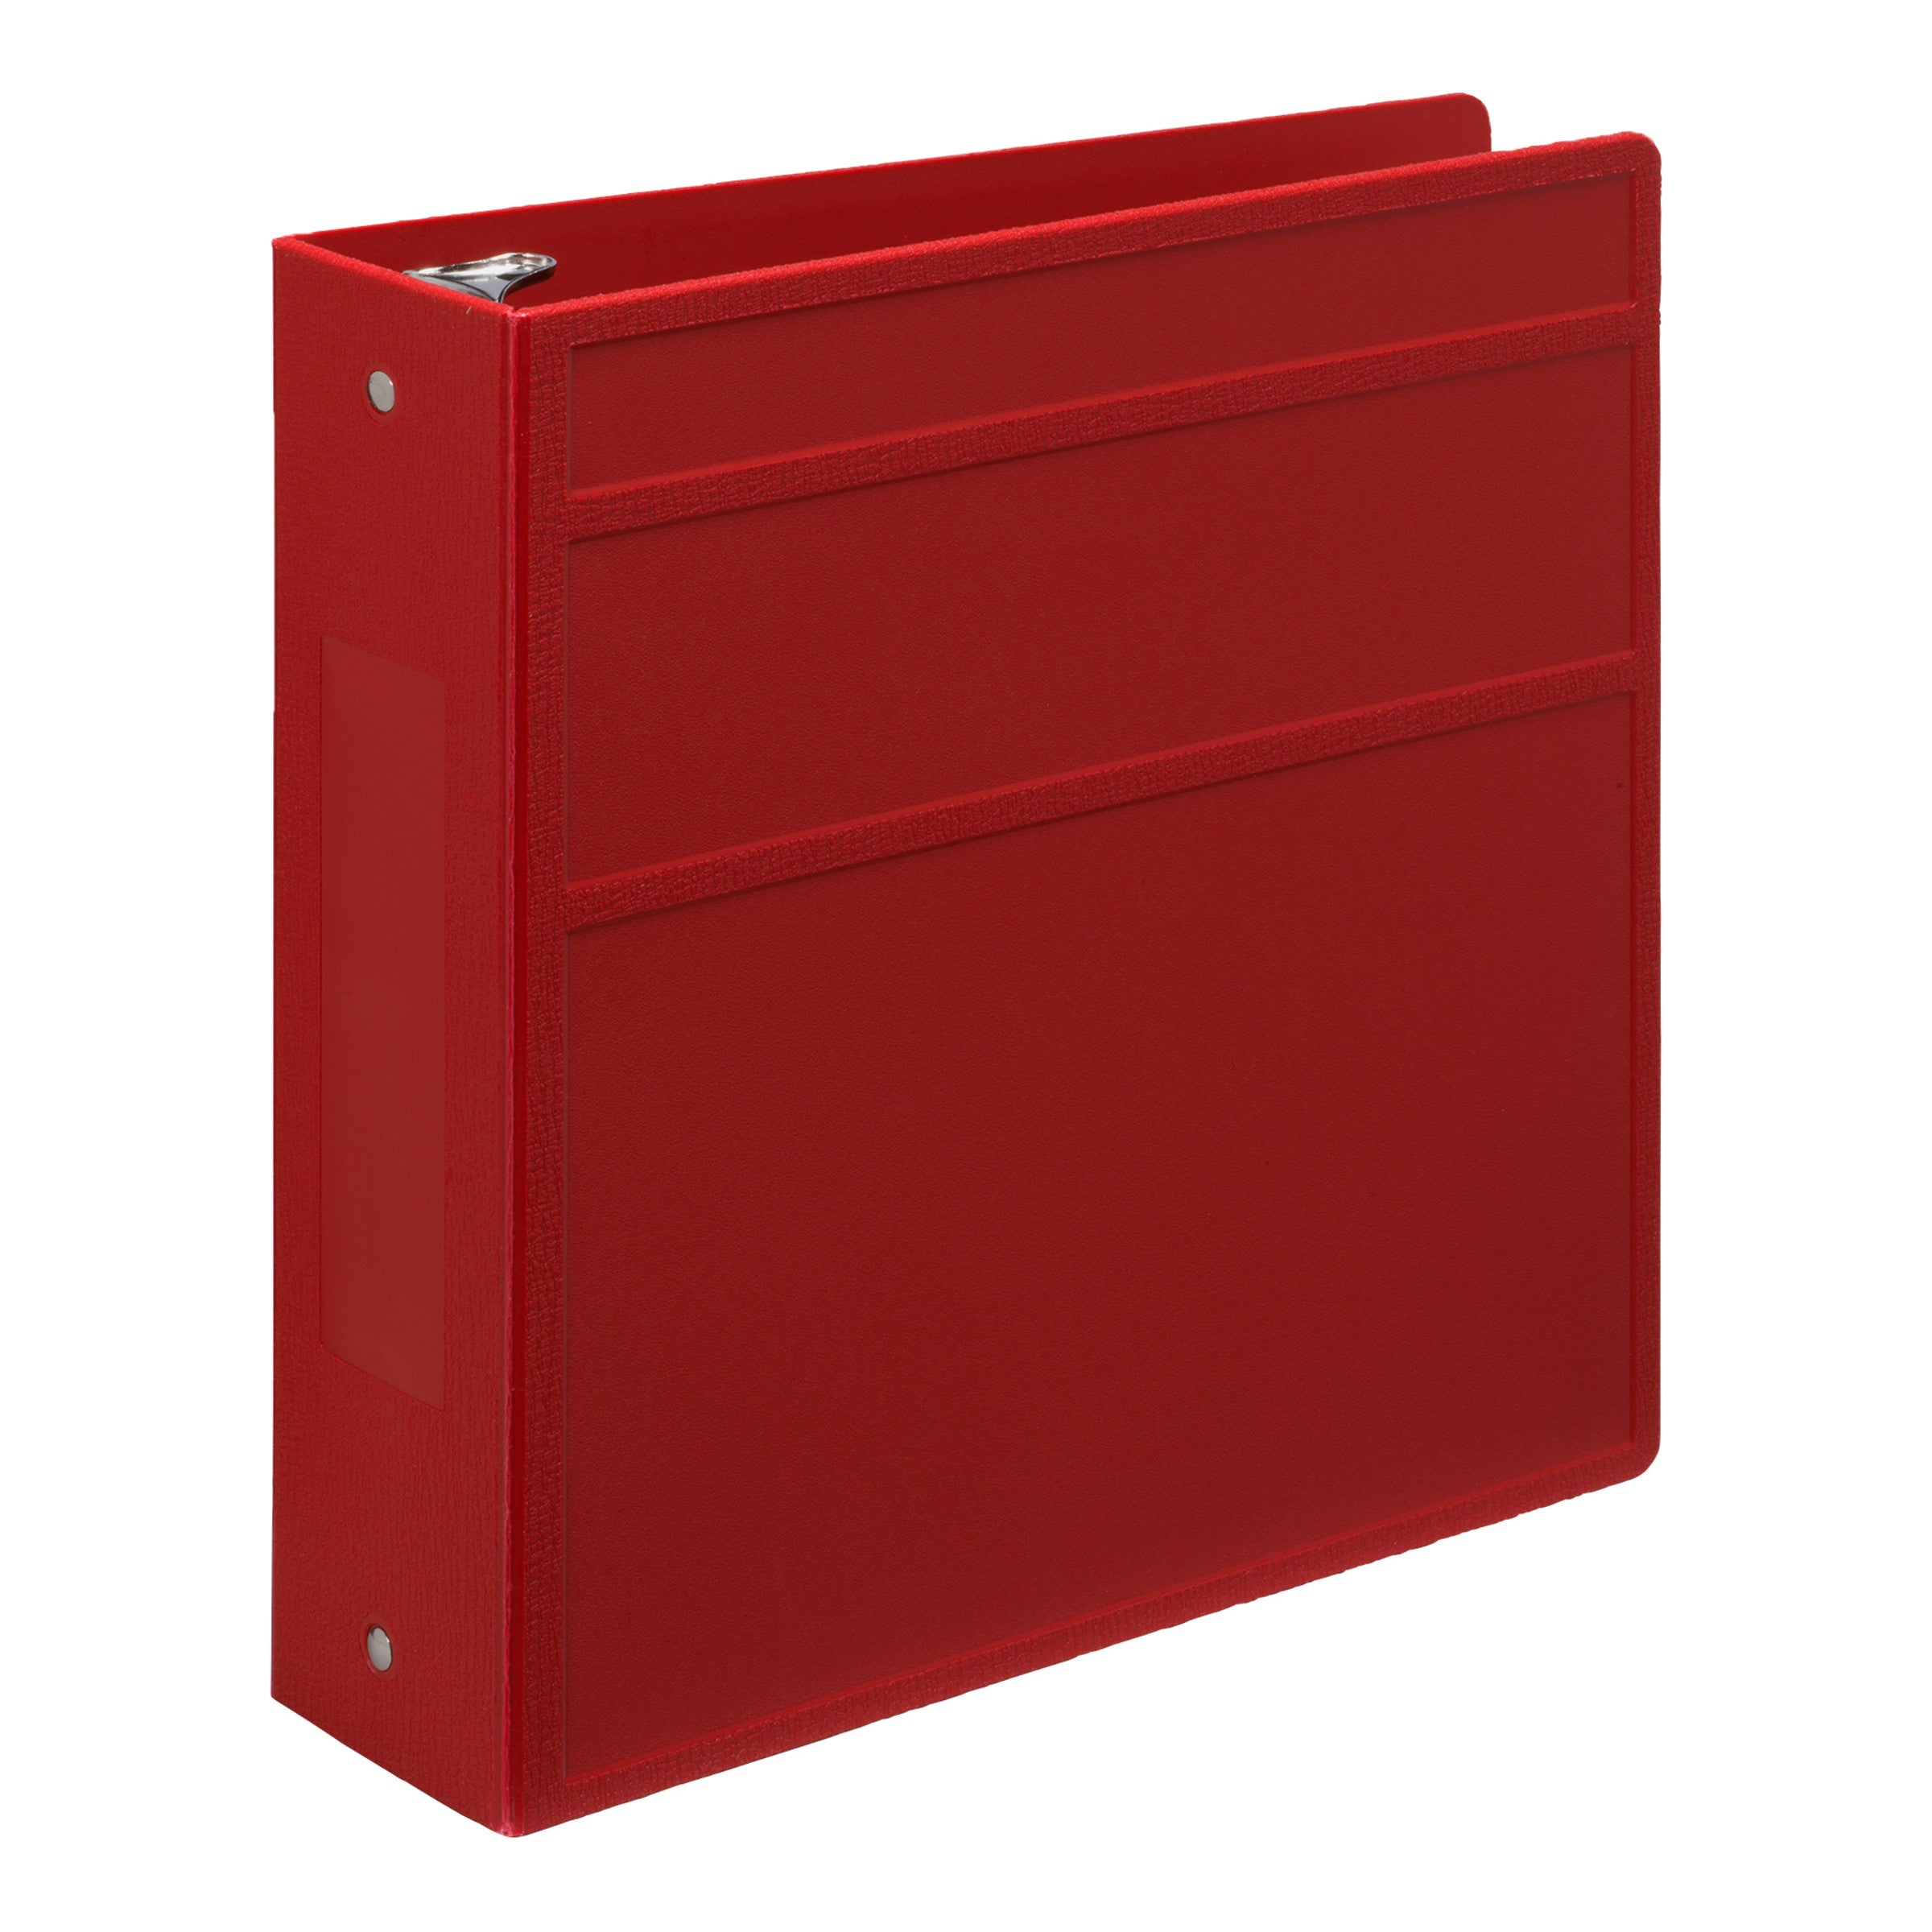 3-Inch Heavy Duty 3-Ring Binder for Medical Charting – Side Opening